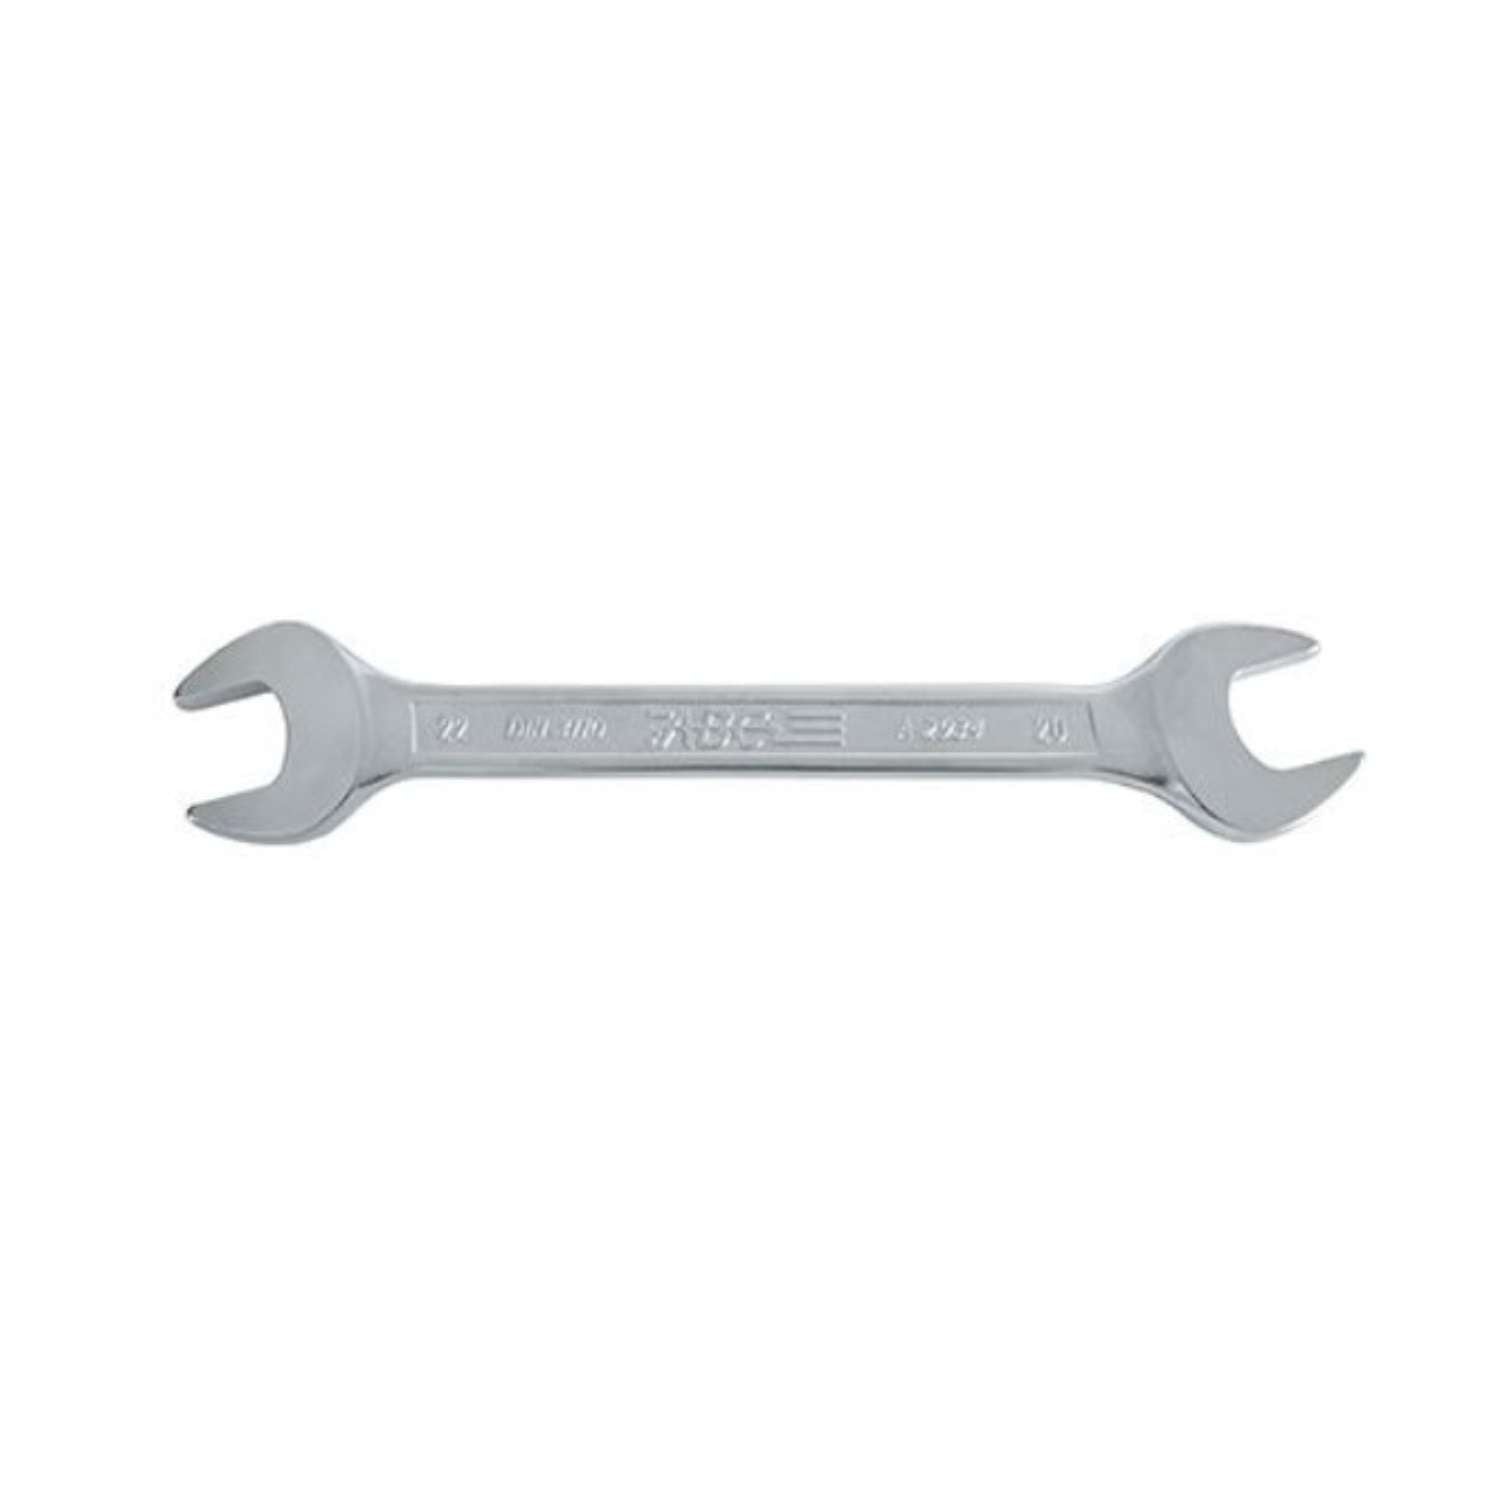 Double open end spanner 6x7 to 30x32mm - A 2934 ABC series